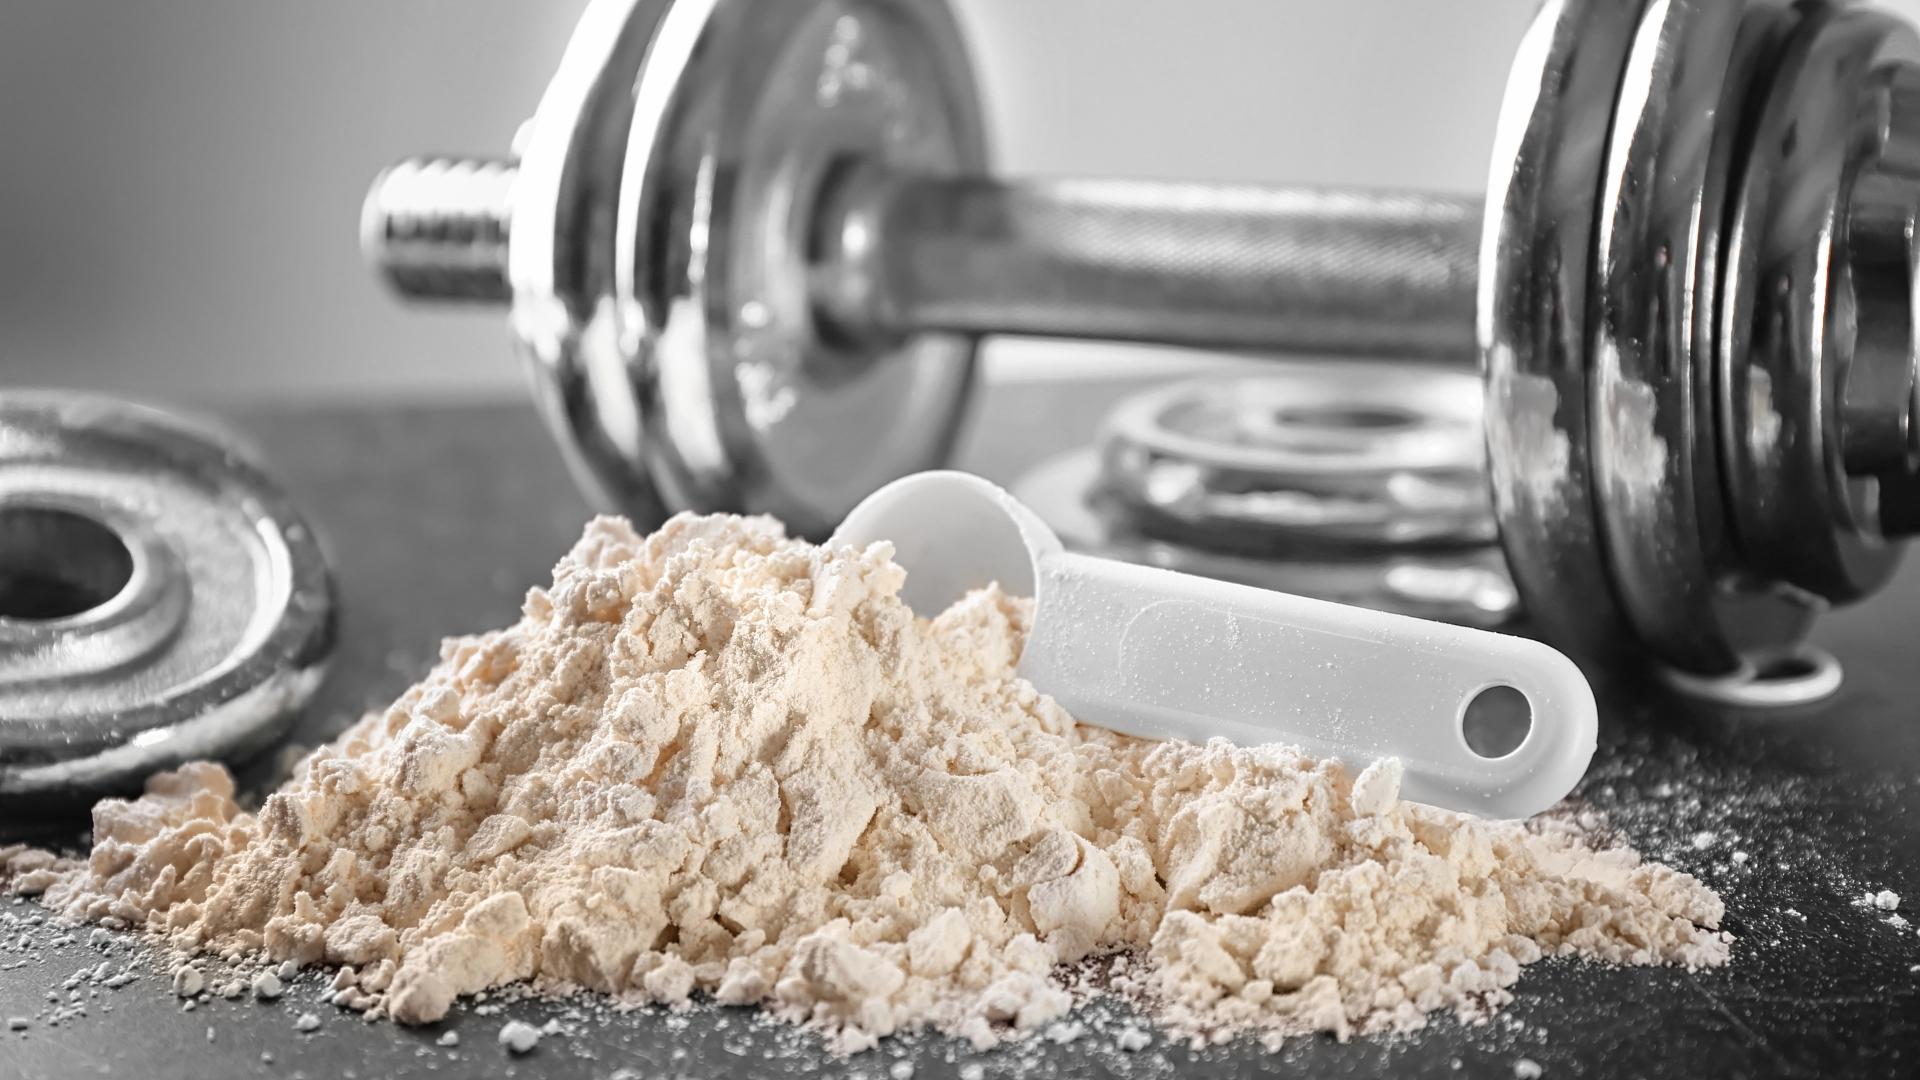 Which Pre-Workout Ingredients Increase Strength?